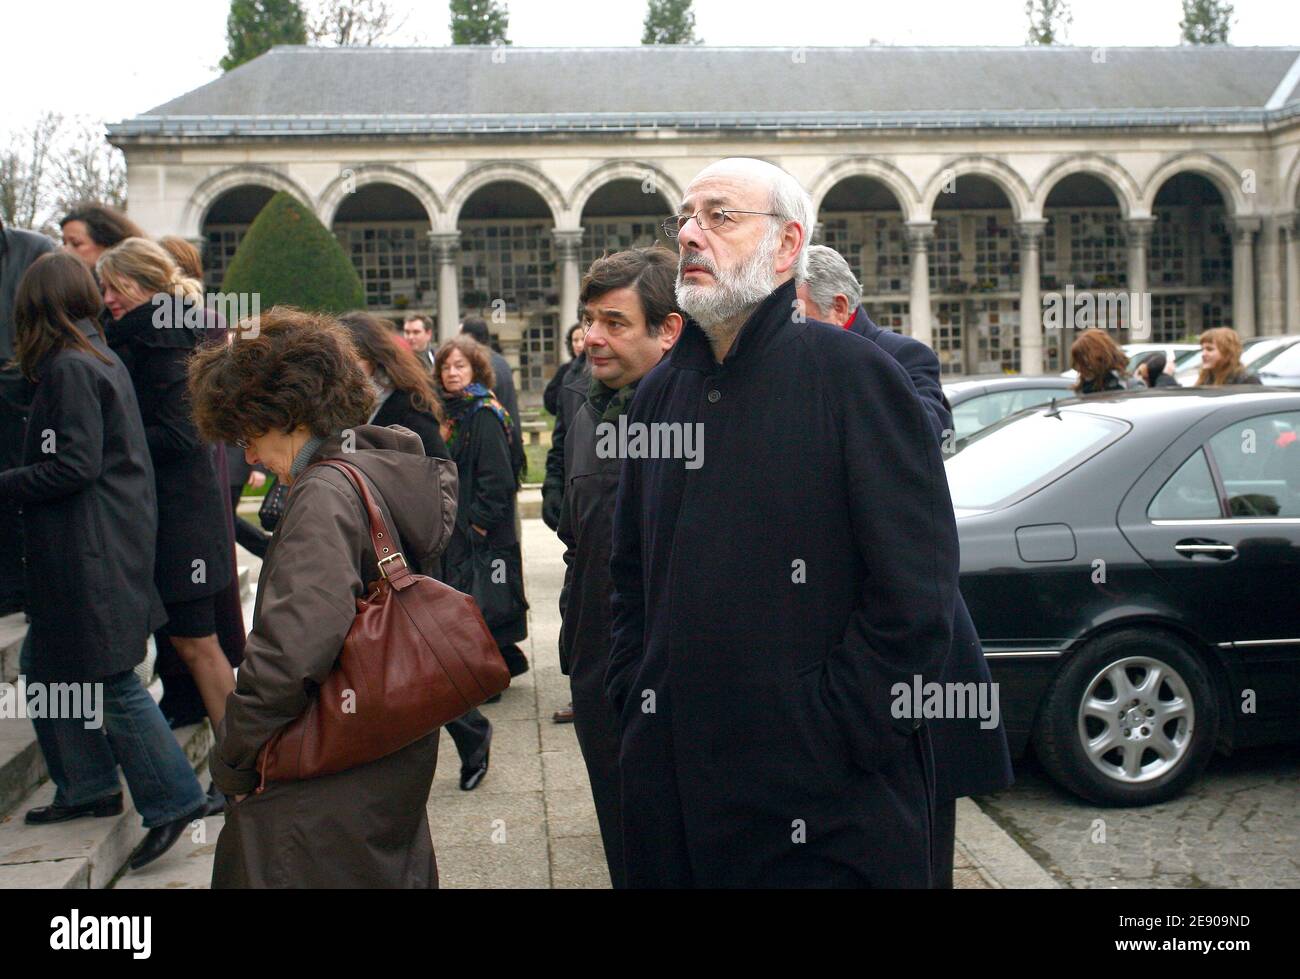 Bertrand Blier attends the funeral of director Pierre Granier-Deferre held at the Pere Lachaise cemetery in Paris, France on November 23, 2007. Photo by Mousse-Khayat/ABACAPRESS.COM Stock Photo